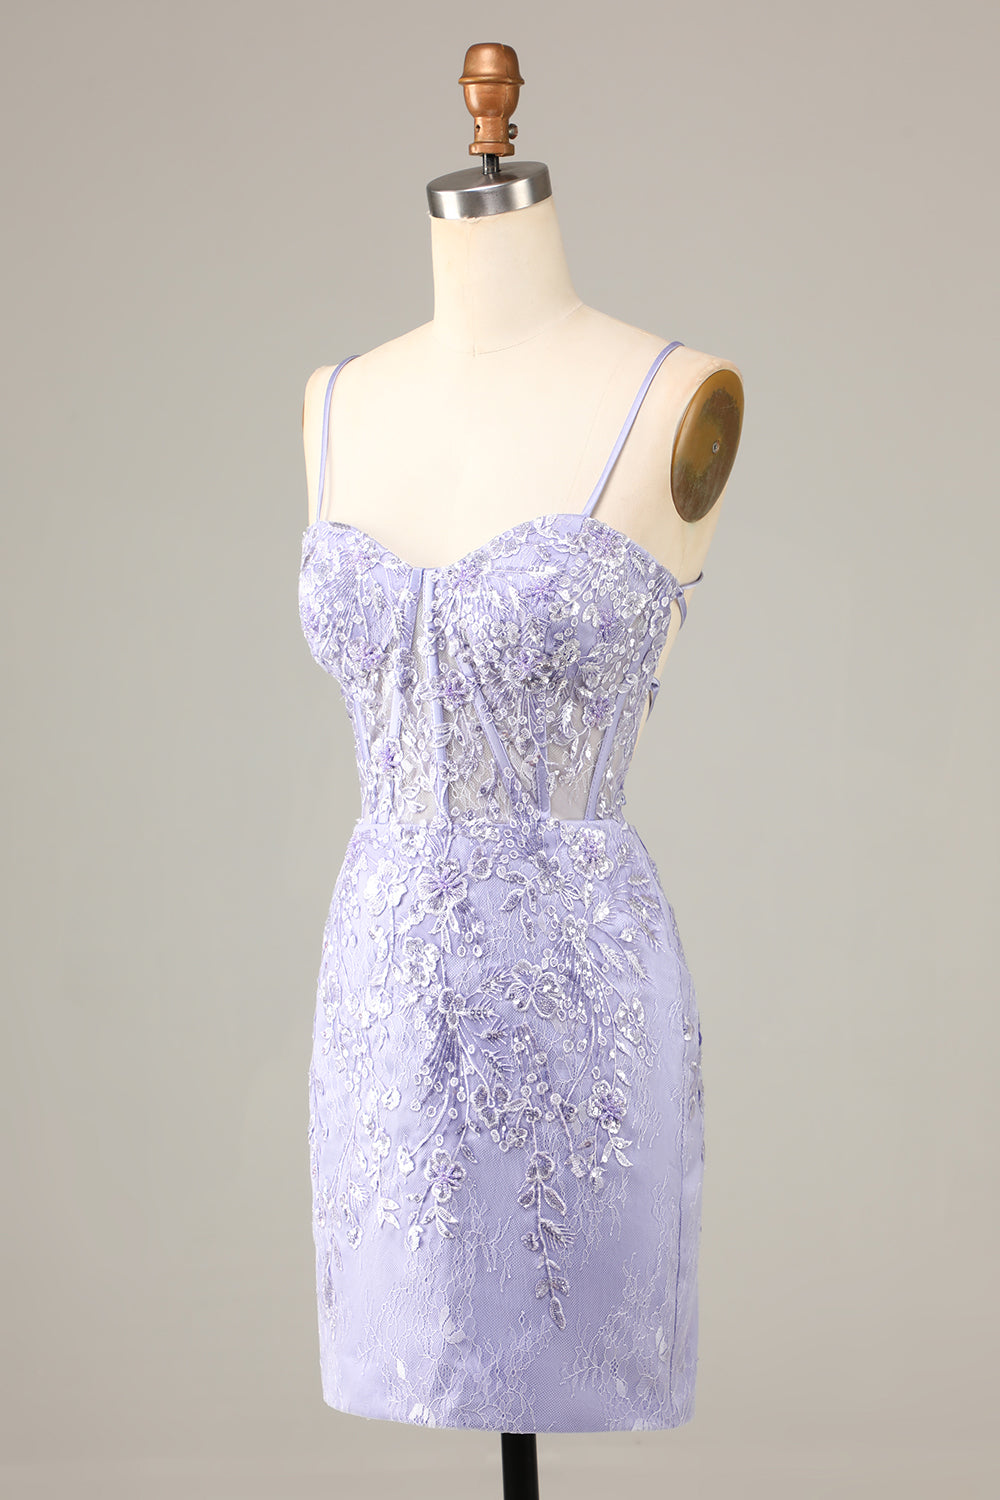 Pretty Bodycon Corset Homecoming Dress With Lace Detail